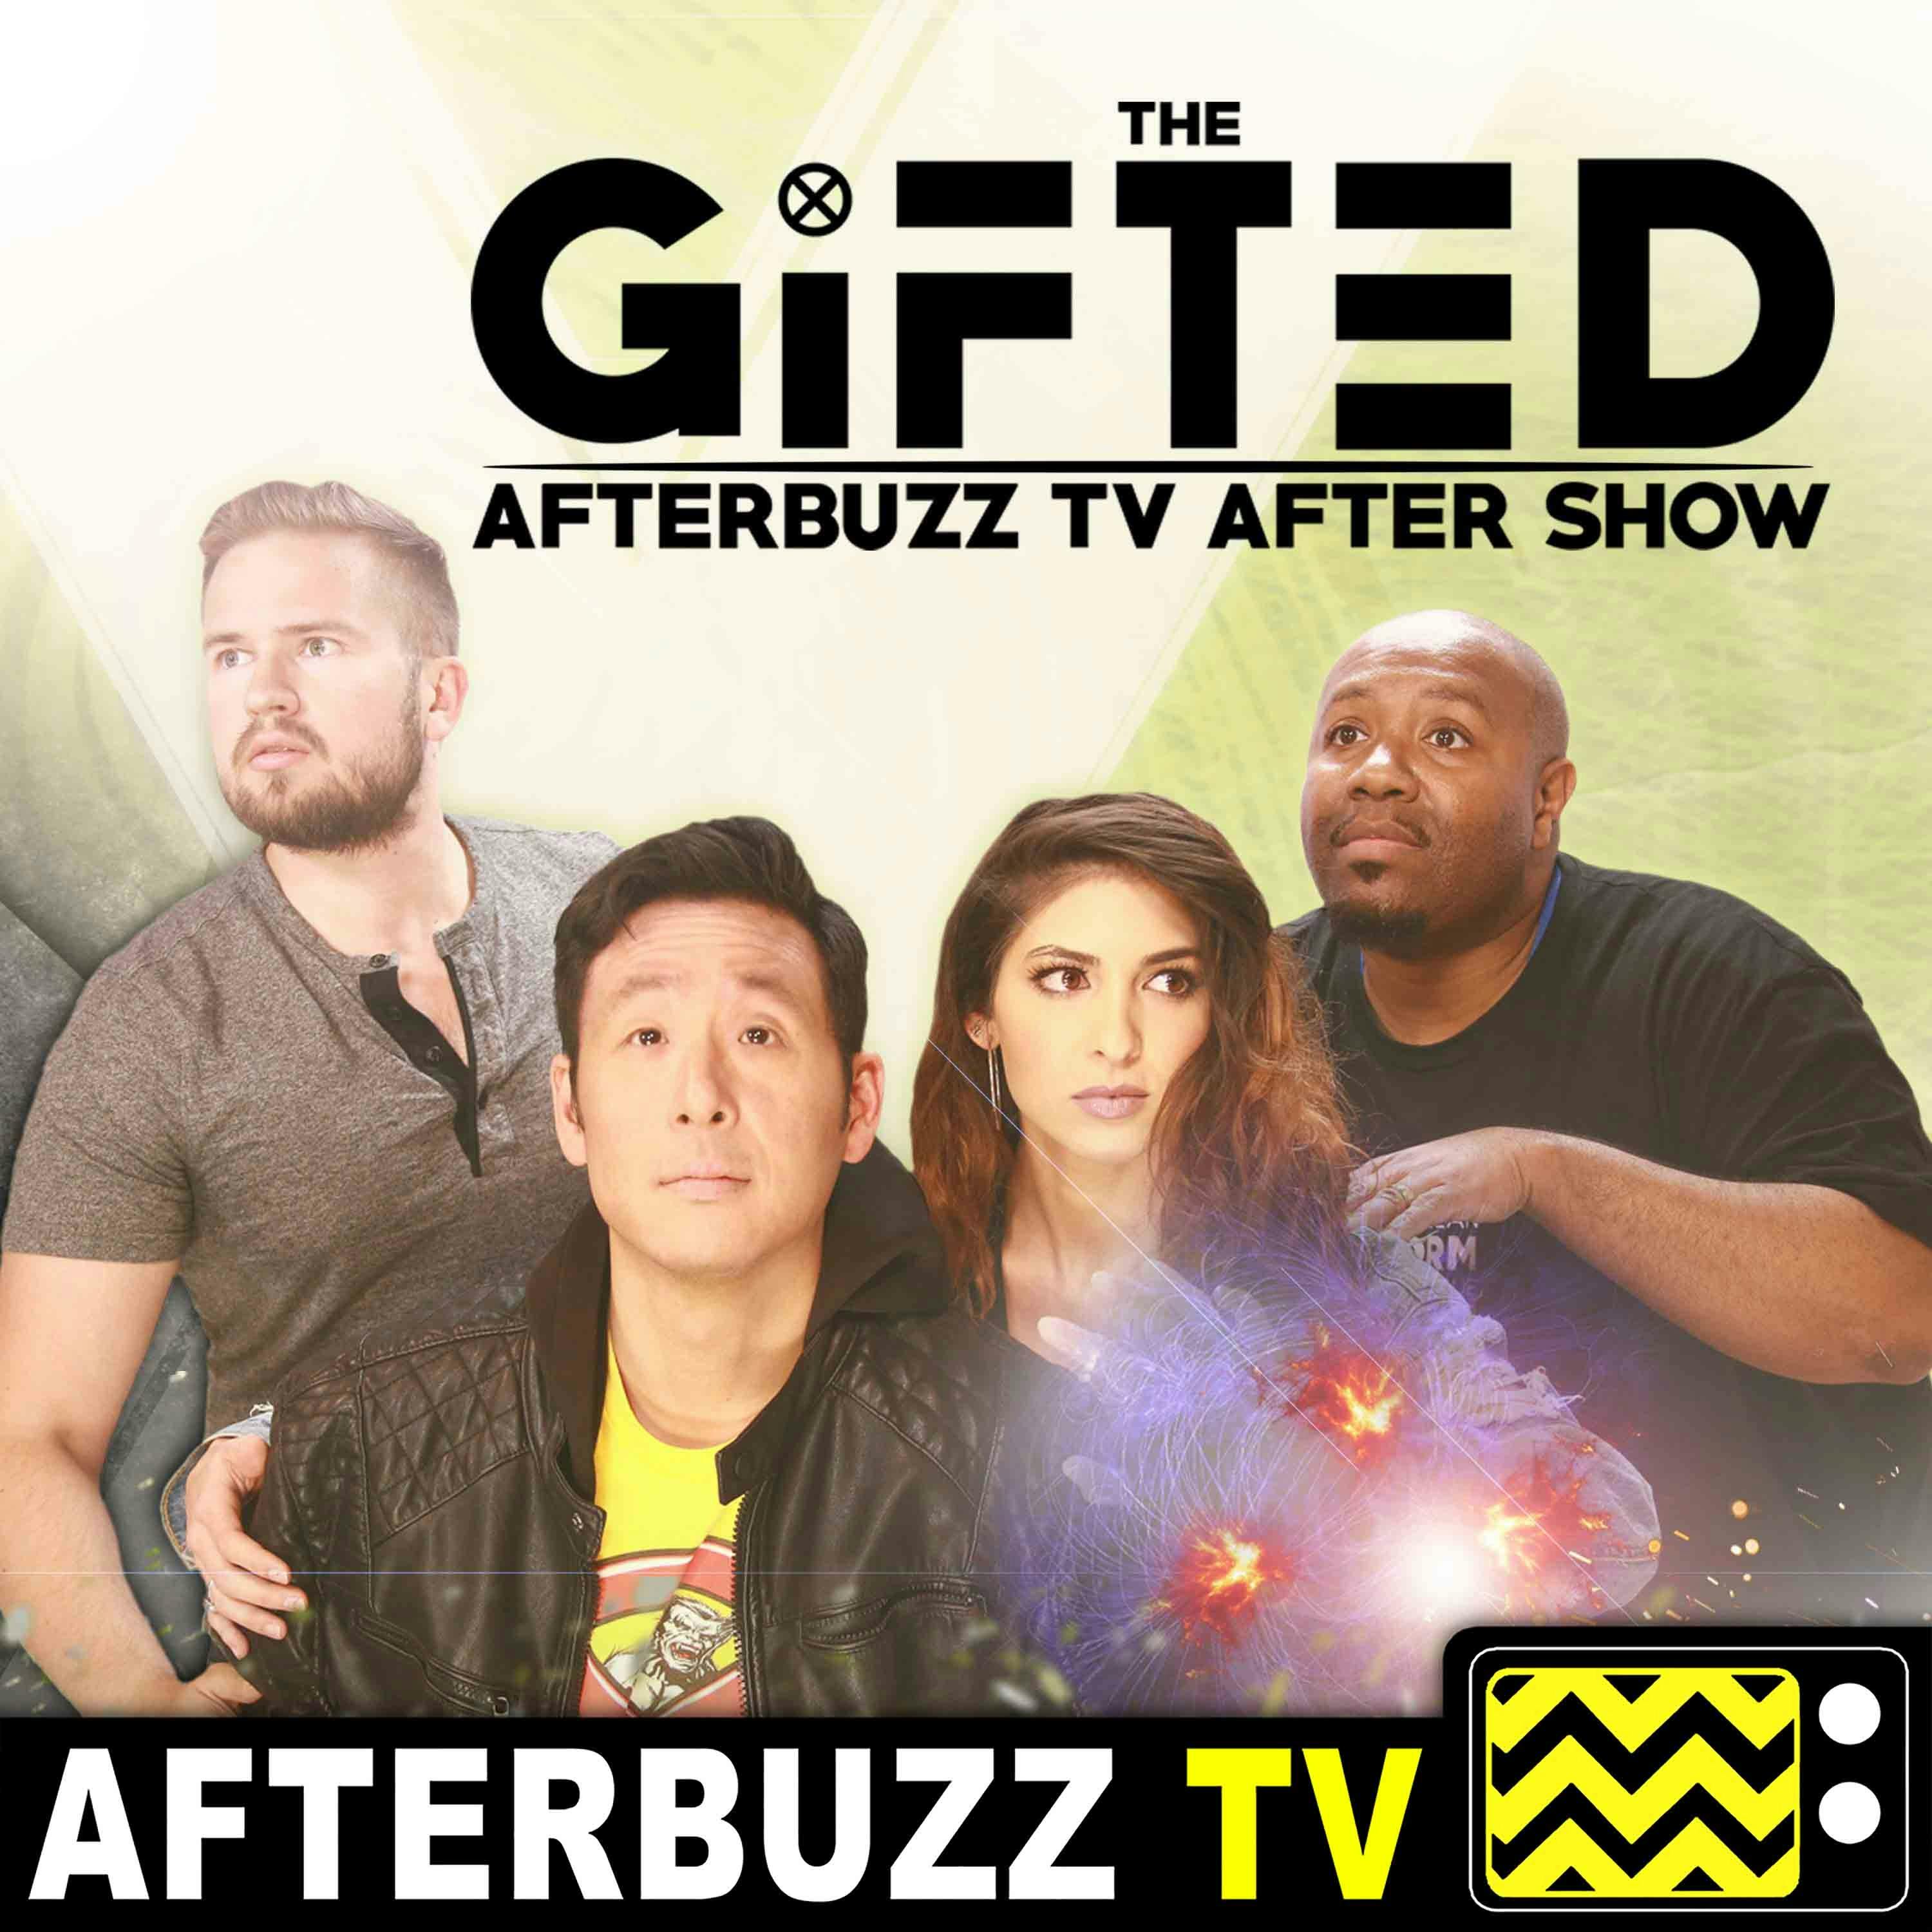 The Gifted S:1 | Andrew Cholerton Guests on eXploited E:10 | AfterBuzz TV AfterShow